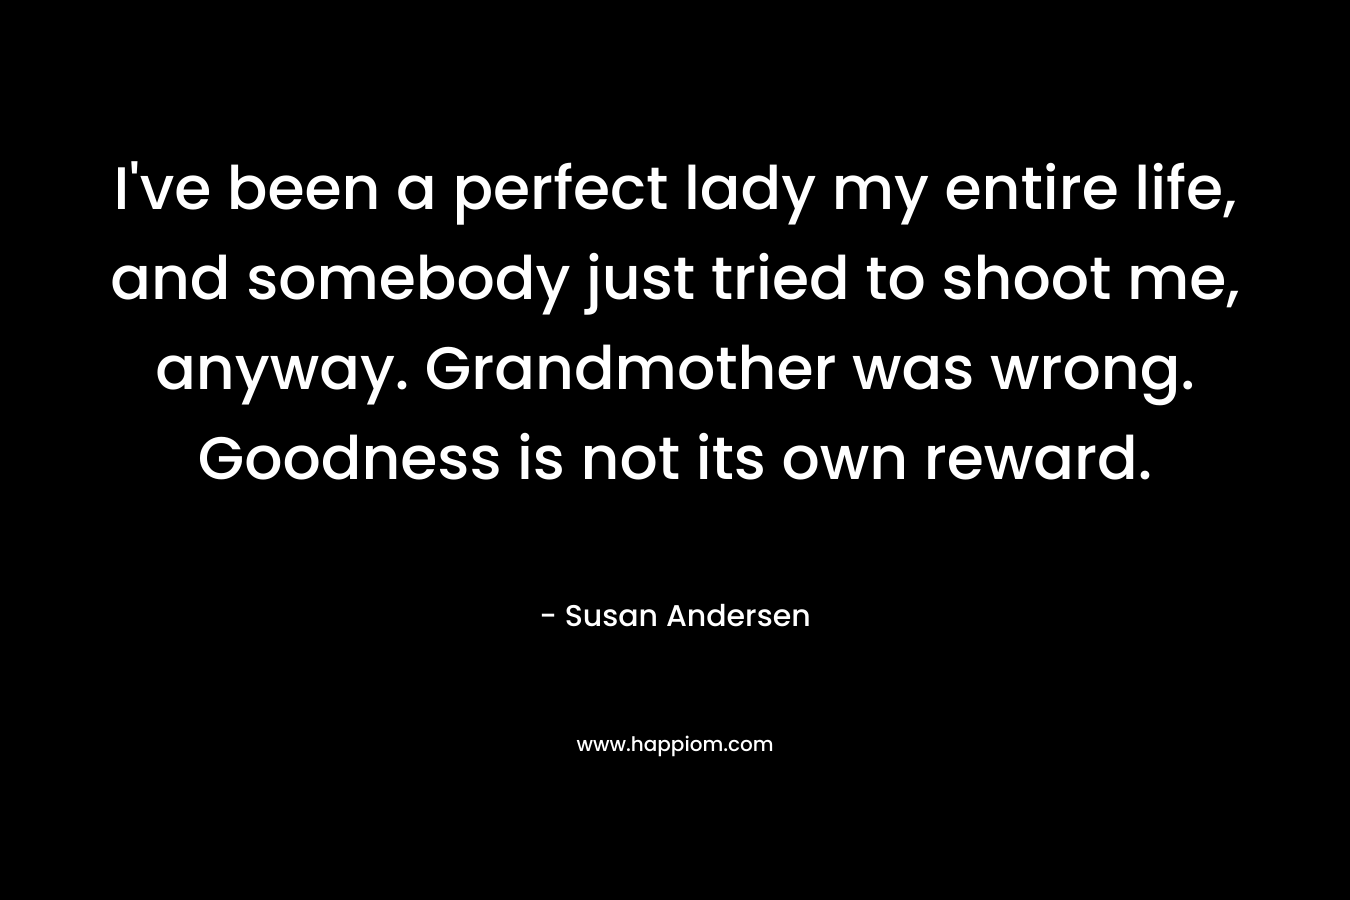 I've been a perfect lady my entire life, and somebody just tried to shoot me, anyway. Grandmother was wrong. Goodness is not its own reward.